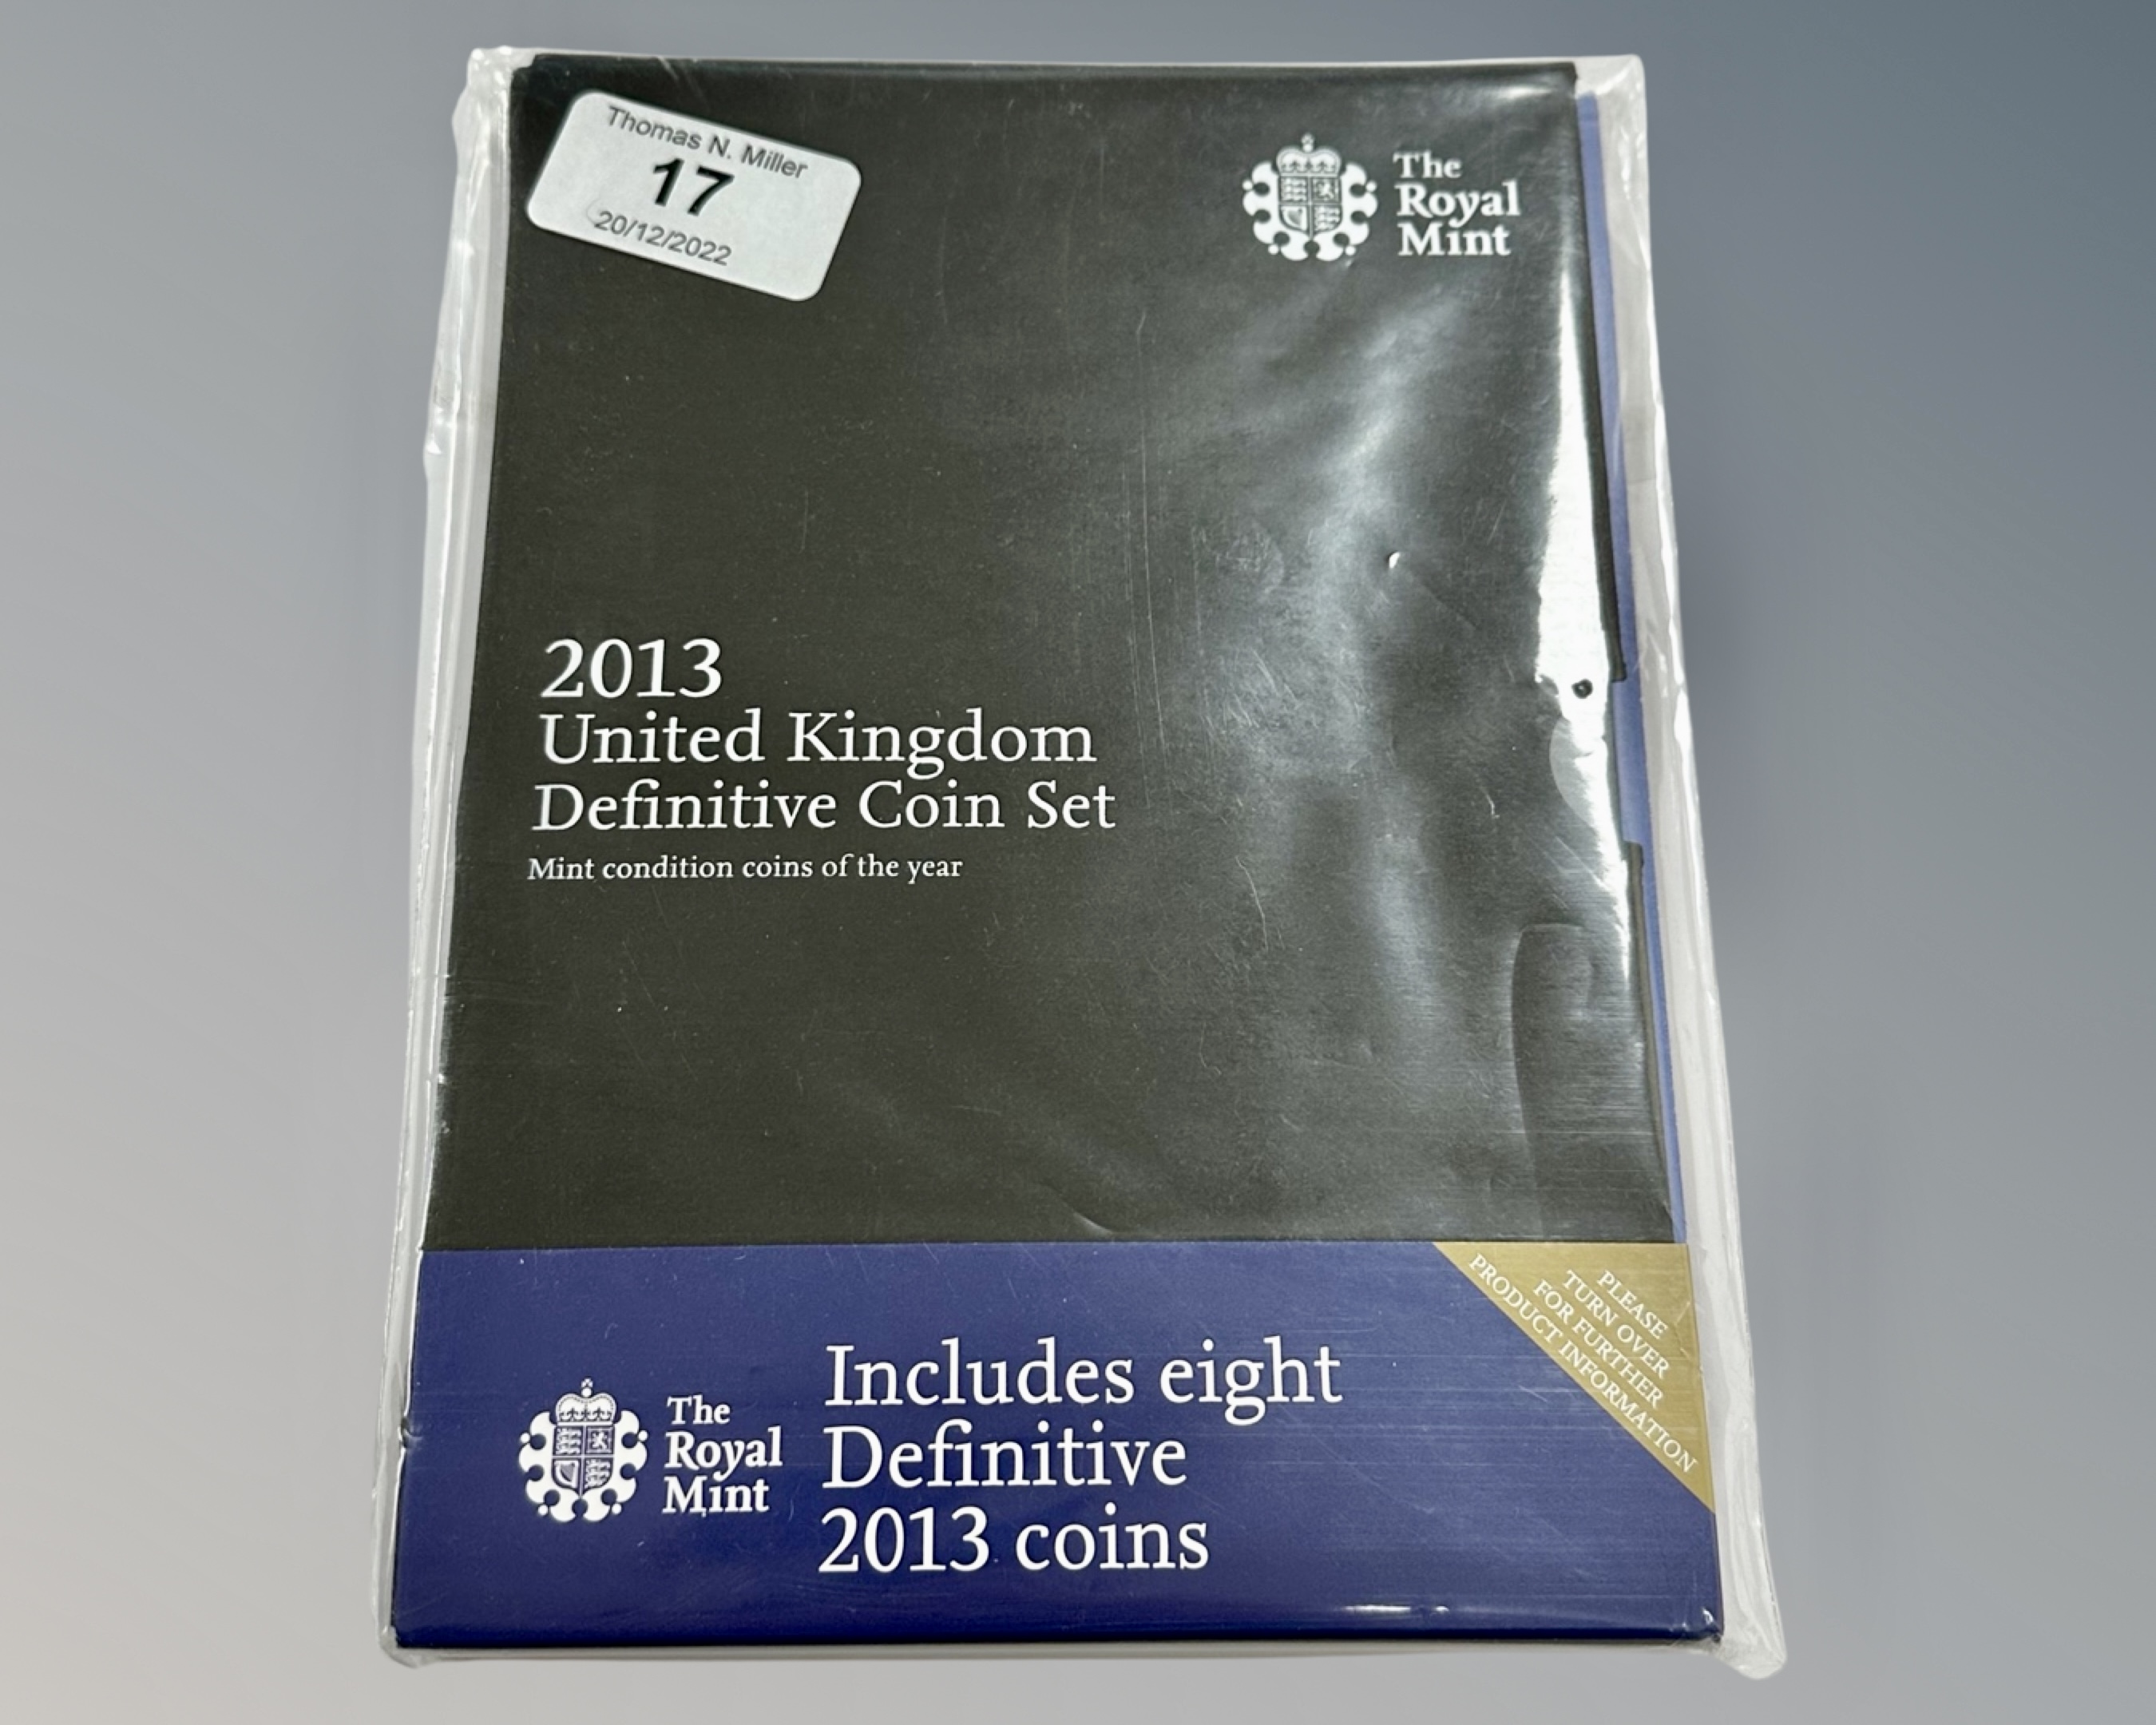 The Royal Mint : A 2013 United Kingdom Definitive coin set, factory sealed.